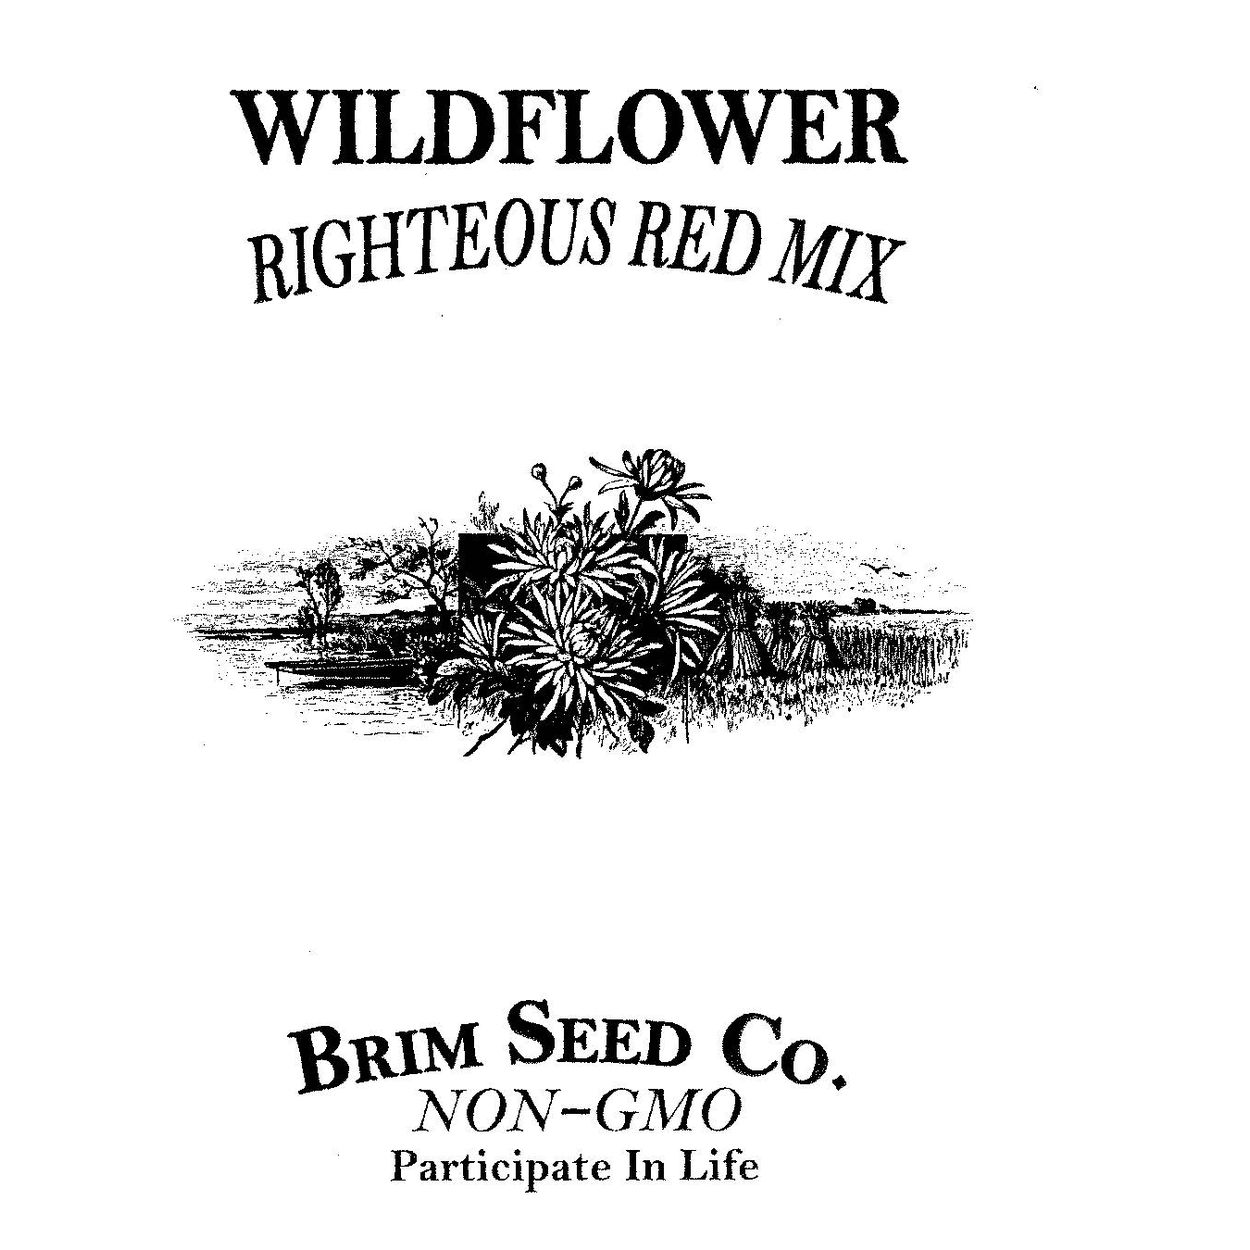 Brim Seed Co. - Righteous Red Mix Wildflower Seed